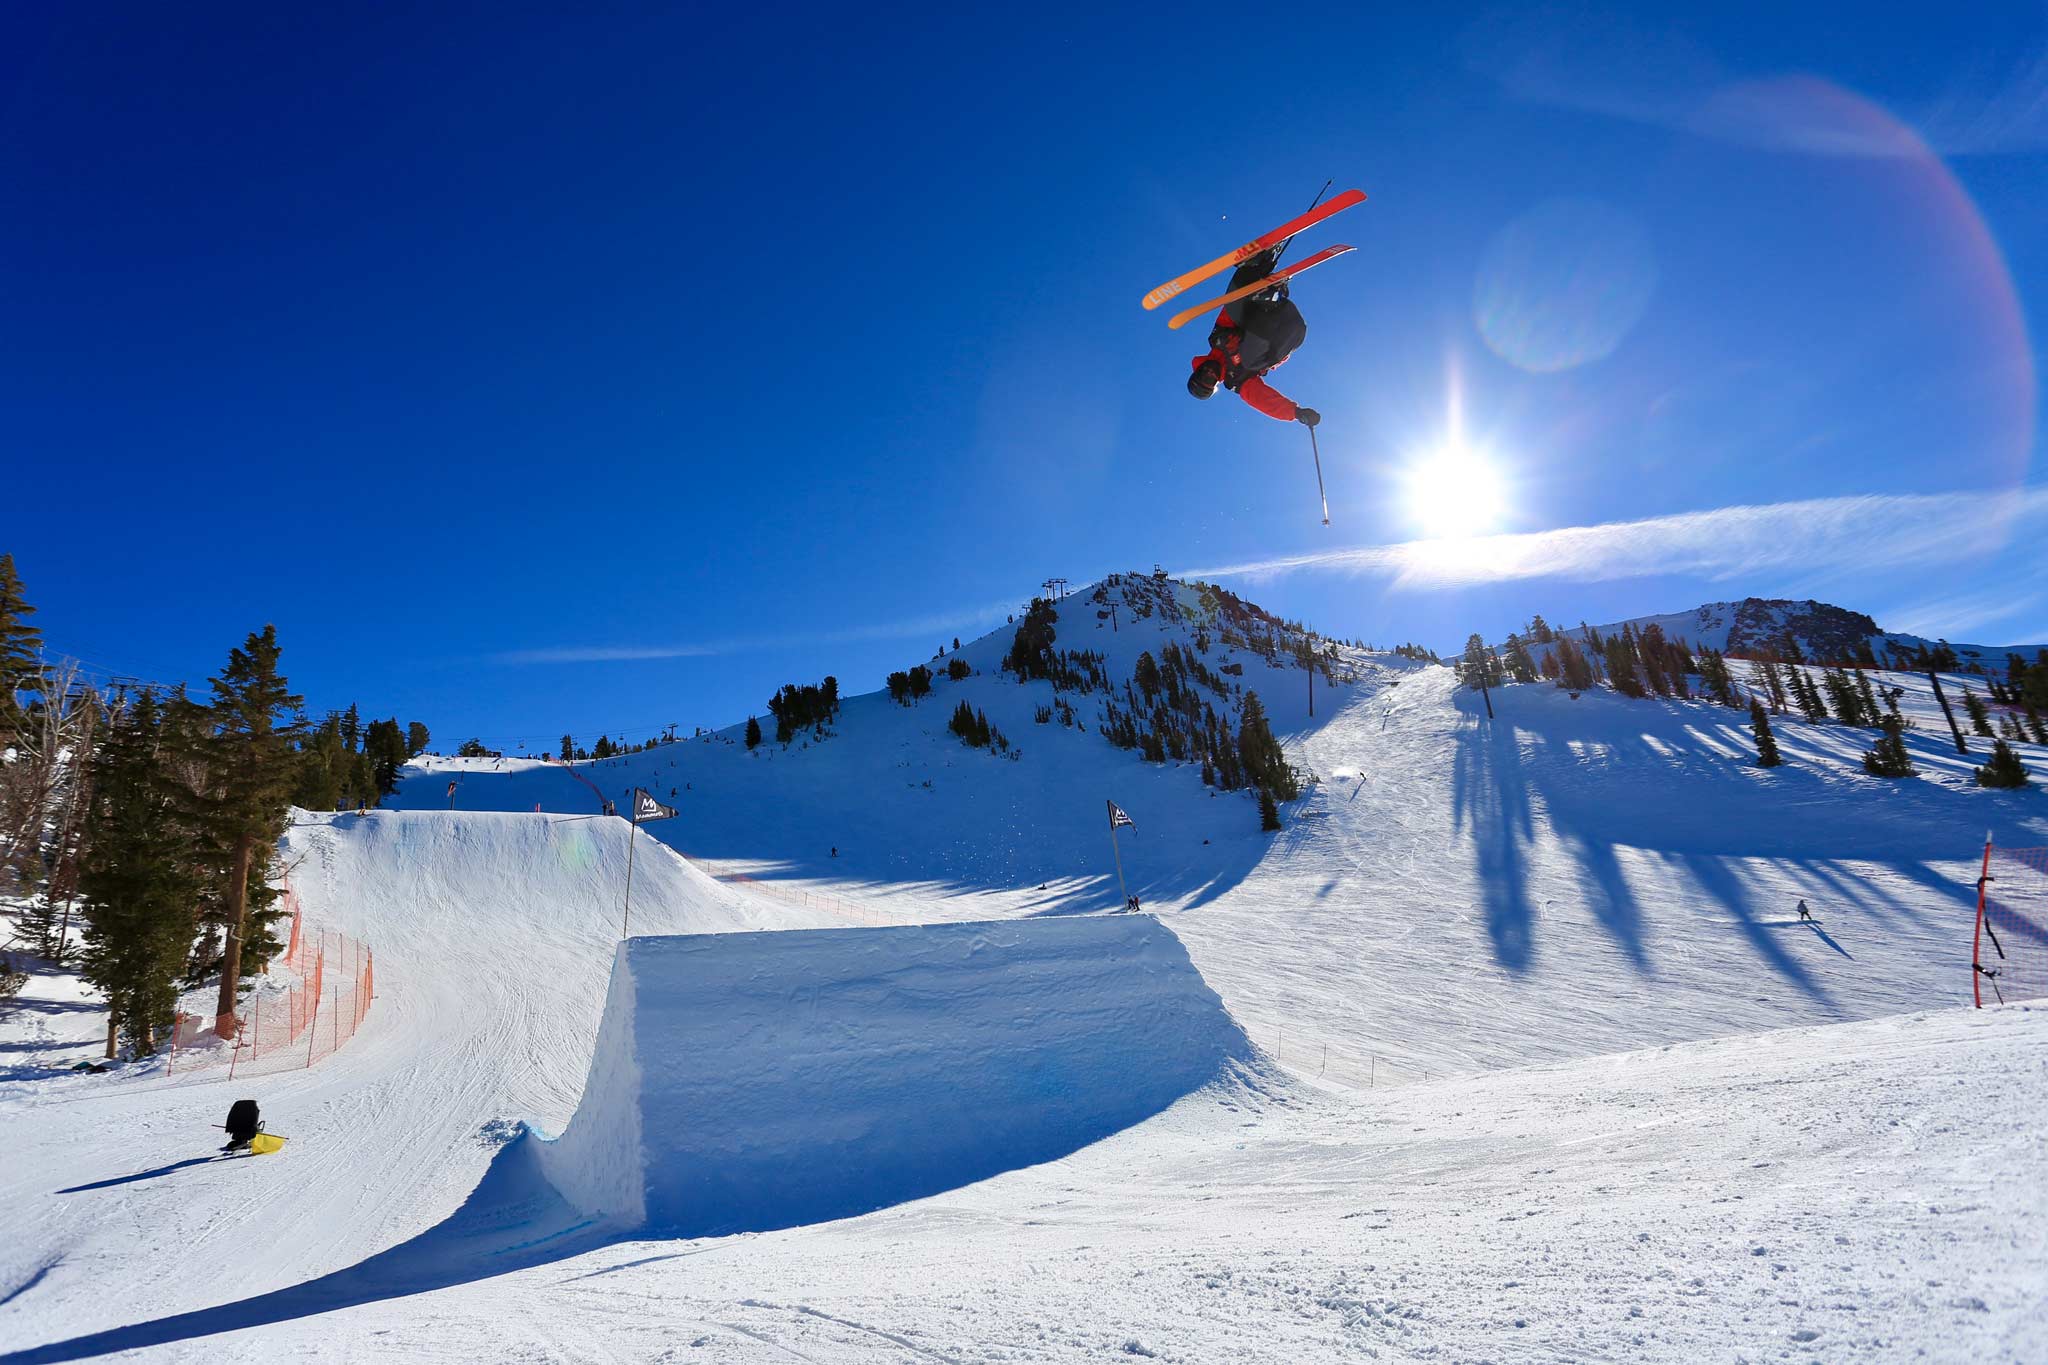 FIS Slopestyle World Cup Mammoth Mountain 2022: Ergebnisse Quali